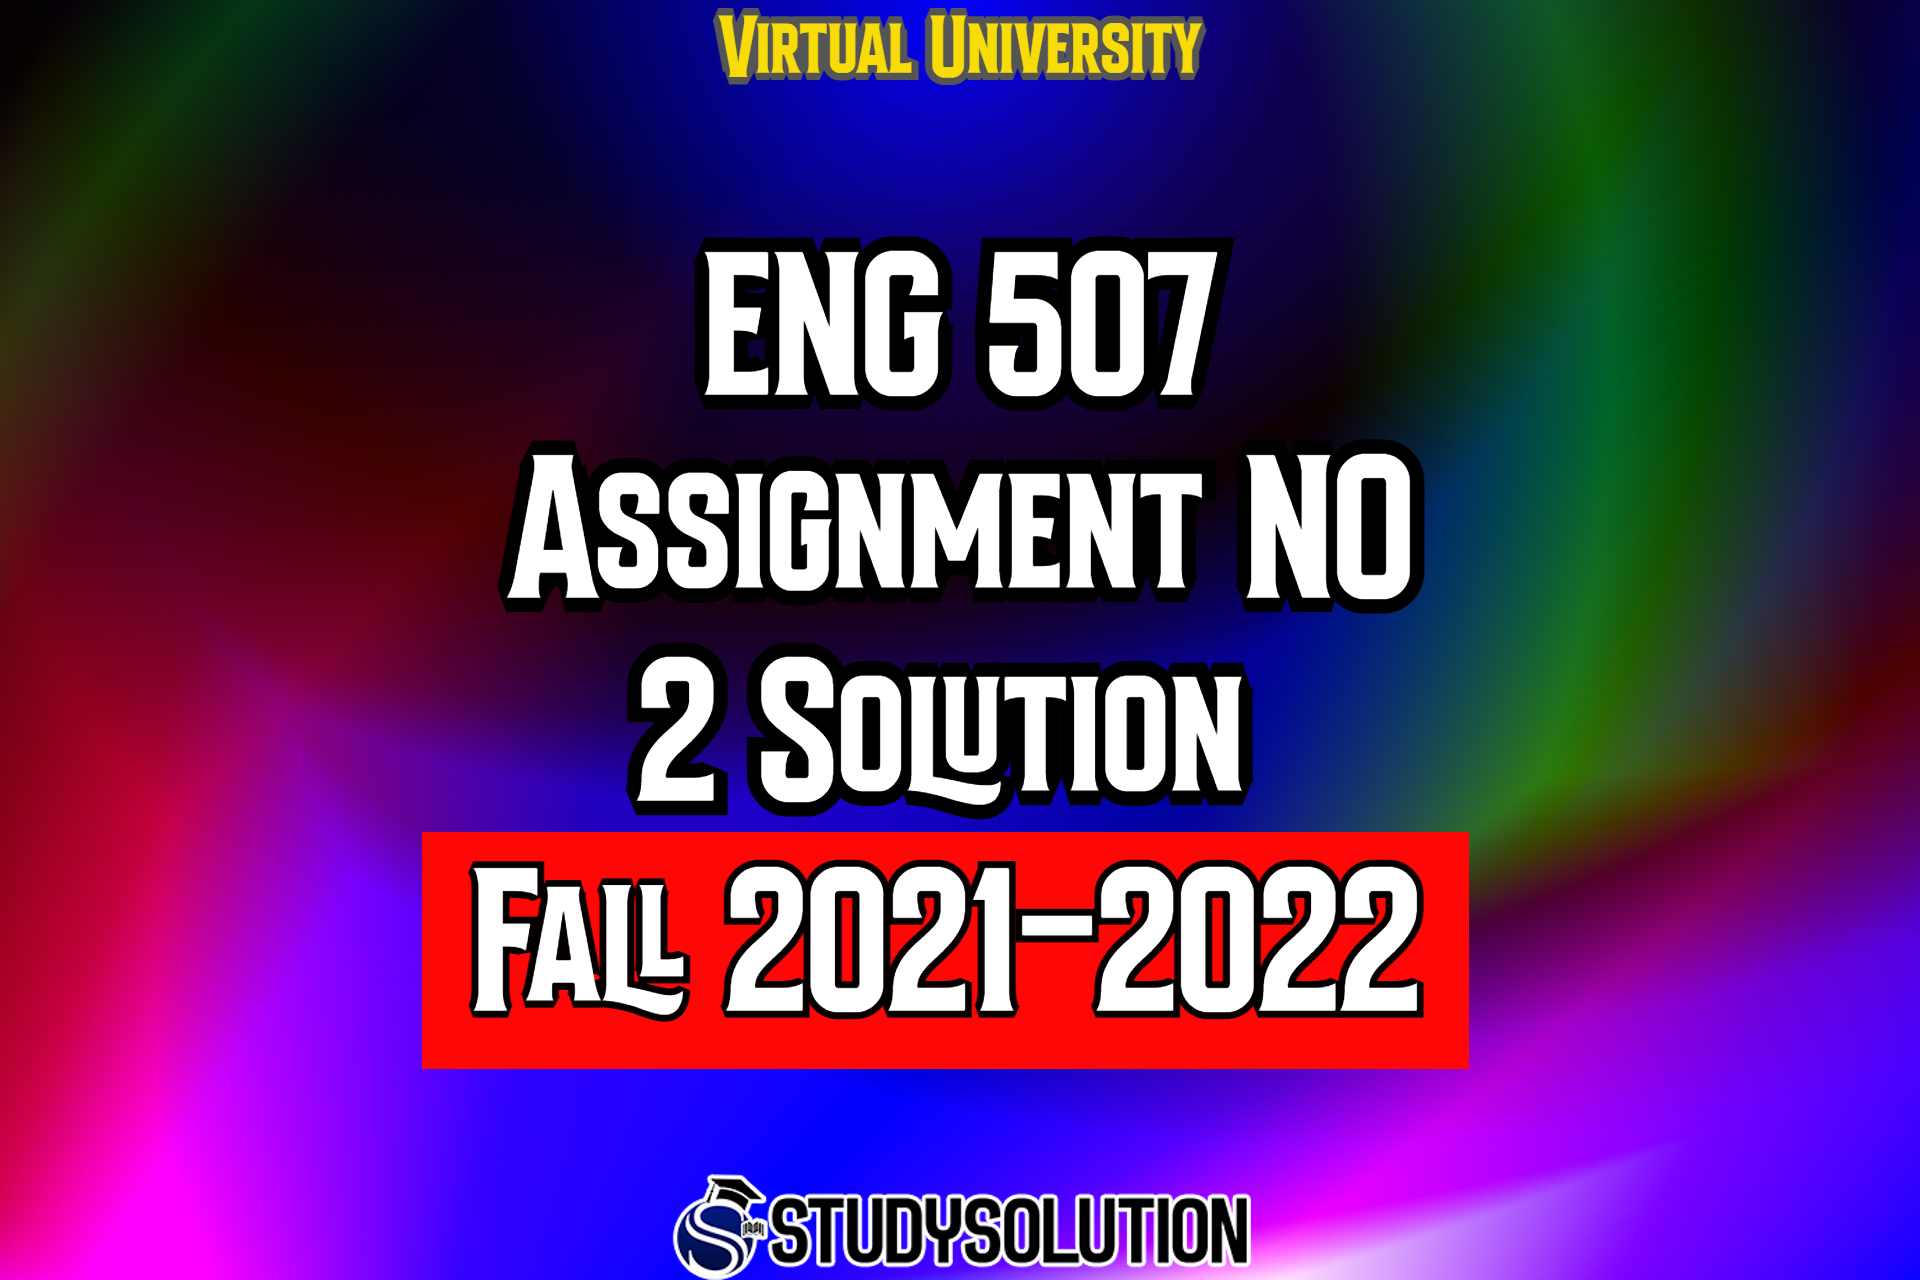 ENG507 Assignment No 2 Solution Fall 2022